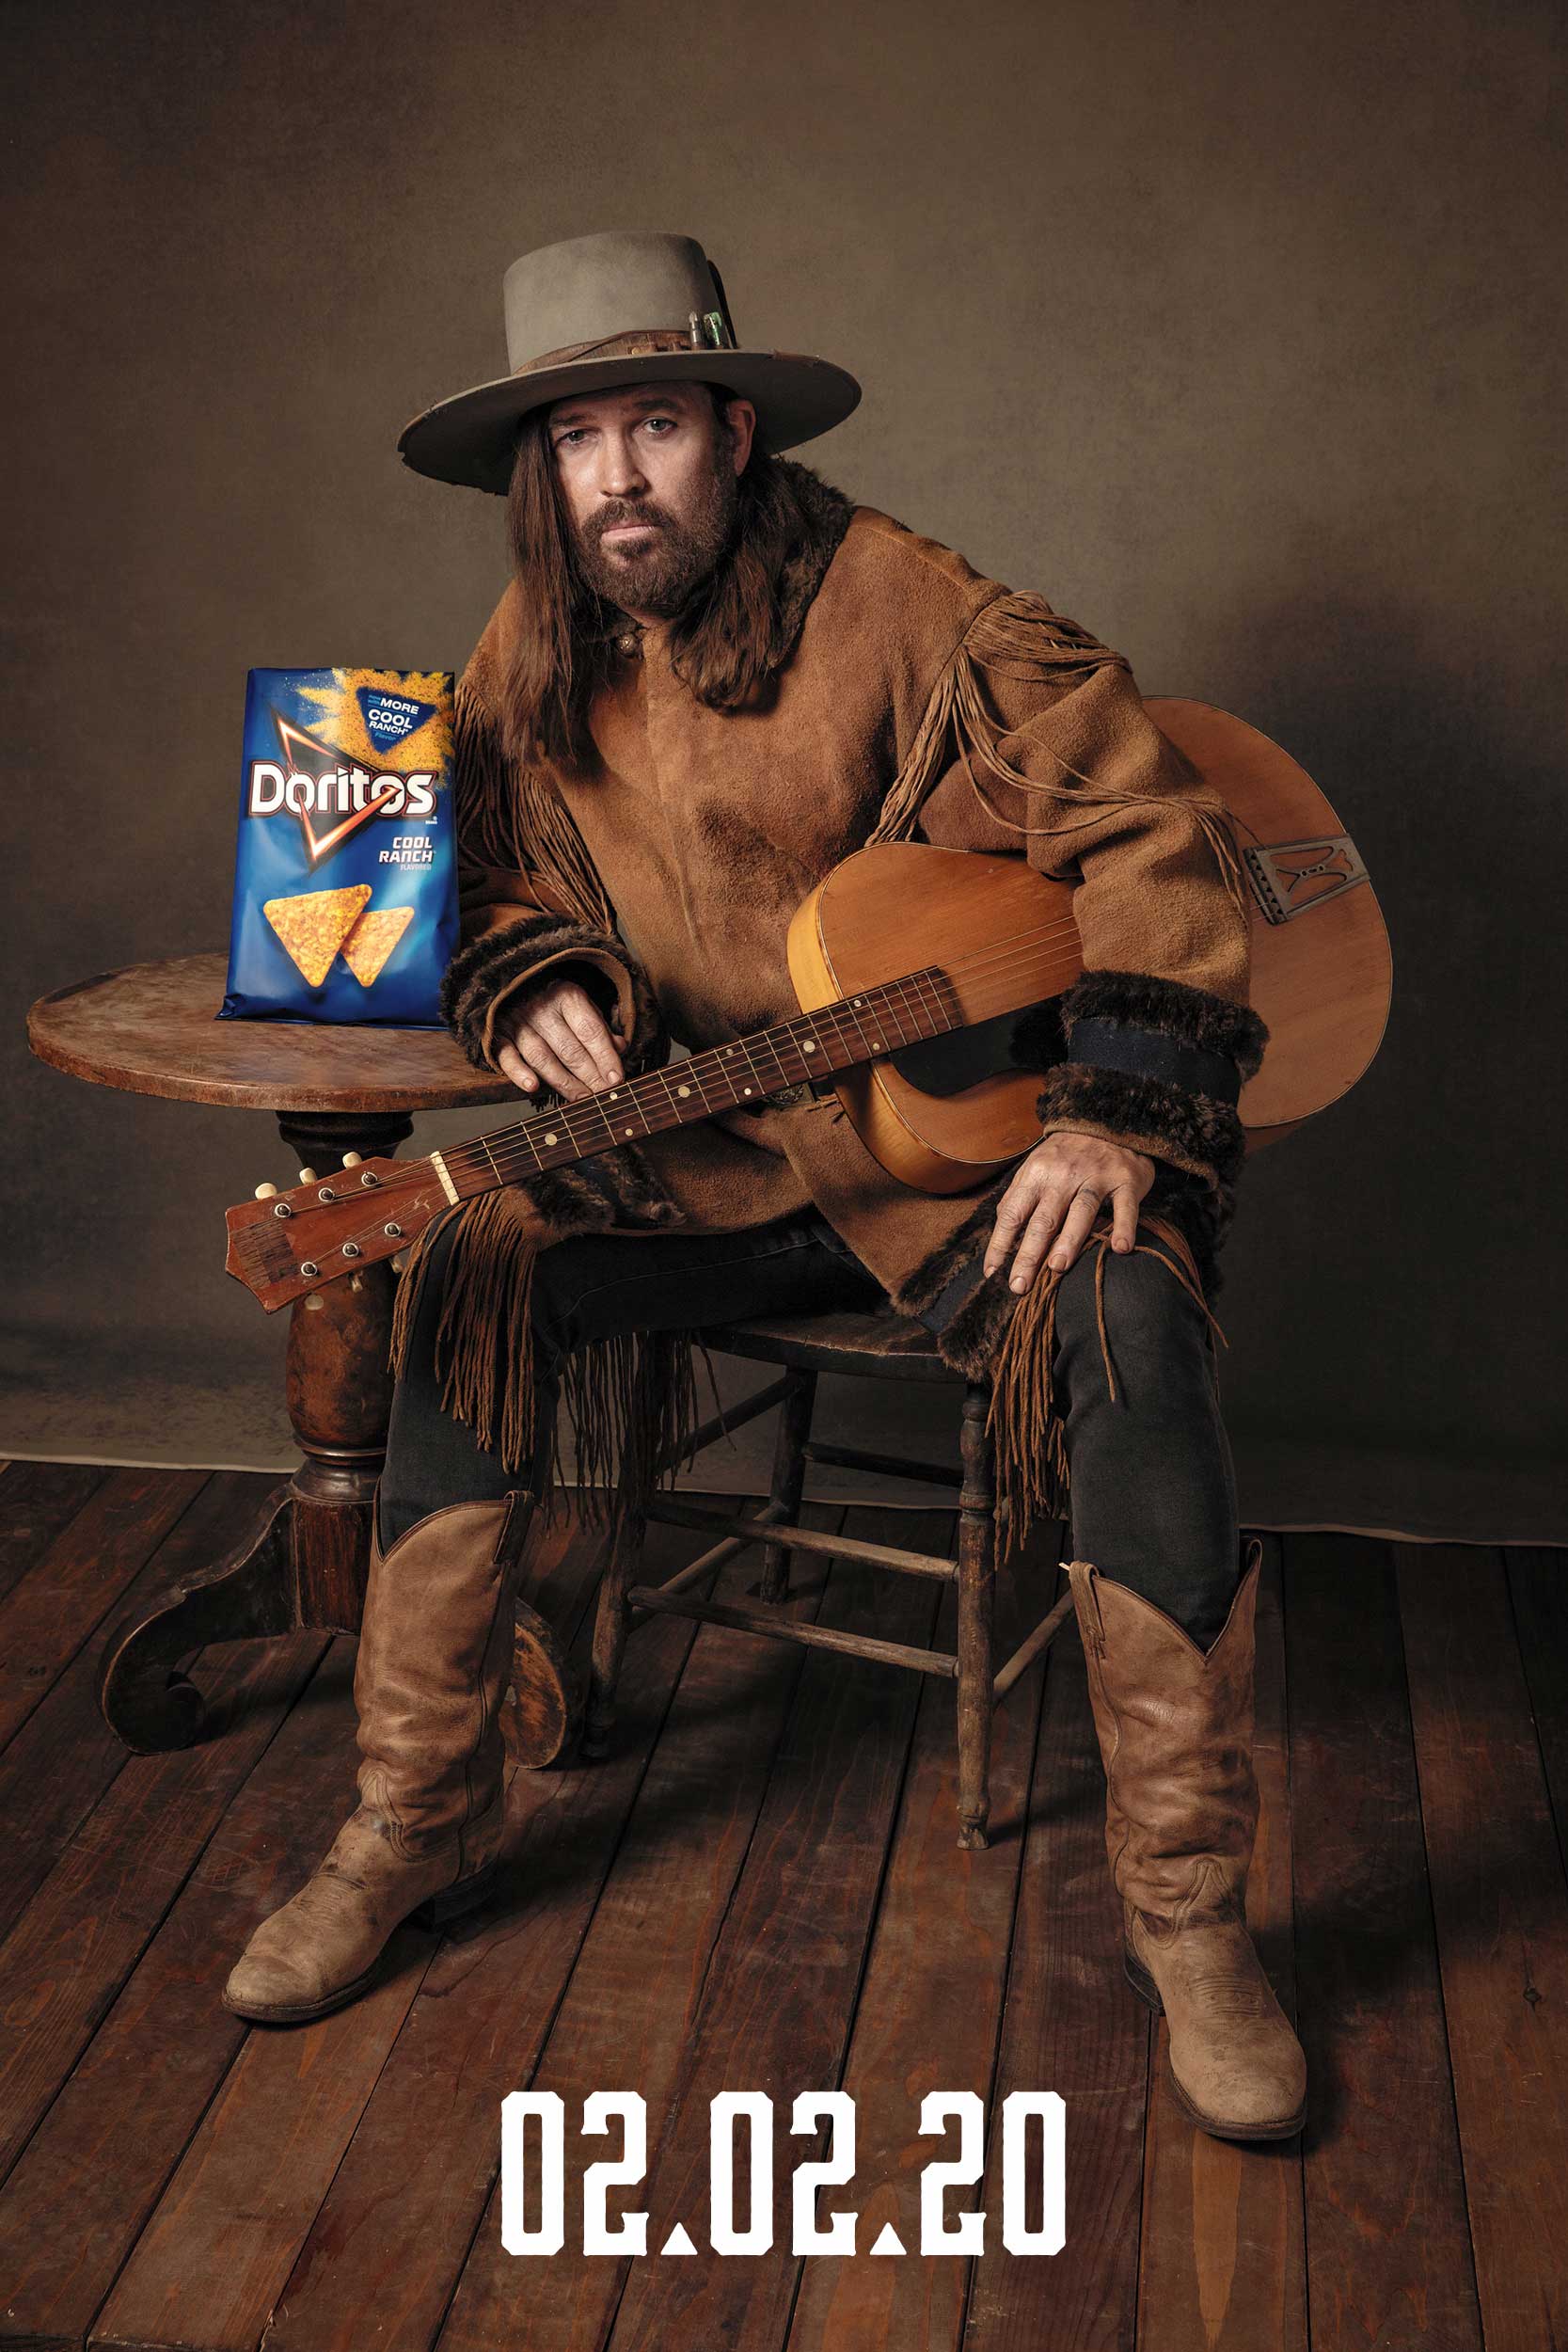 Doritos is bringing the country’s favorite country-meets-rap musical duo -- Lil Nas X and Billy Ray Cyrus -- together for another head-turning collaboration alongside critically acclaimed movie legend, Sam Elliott.